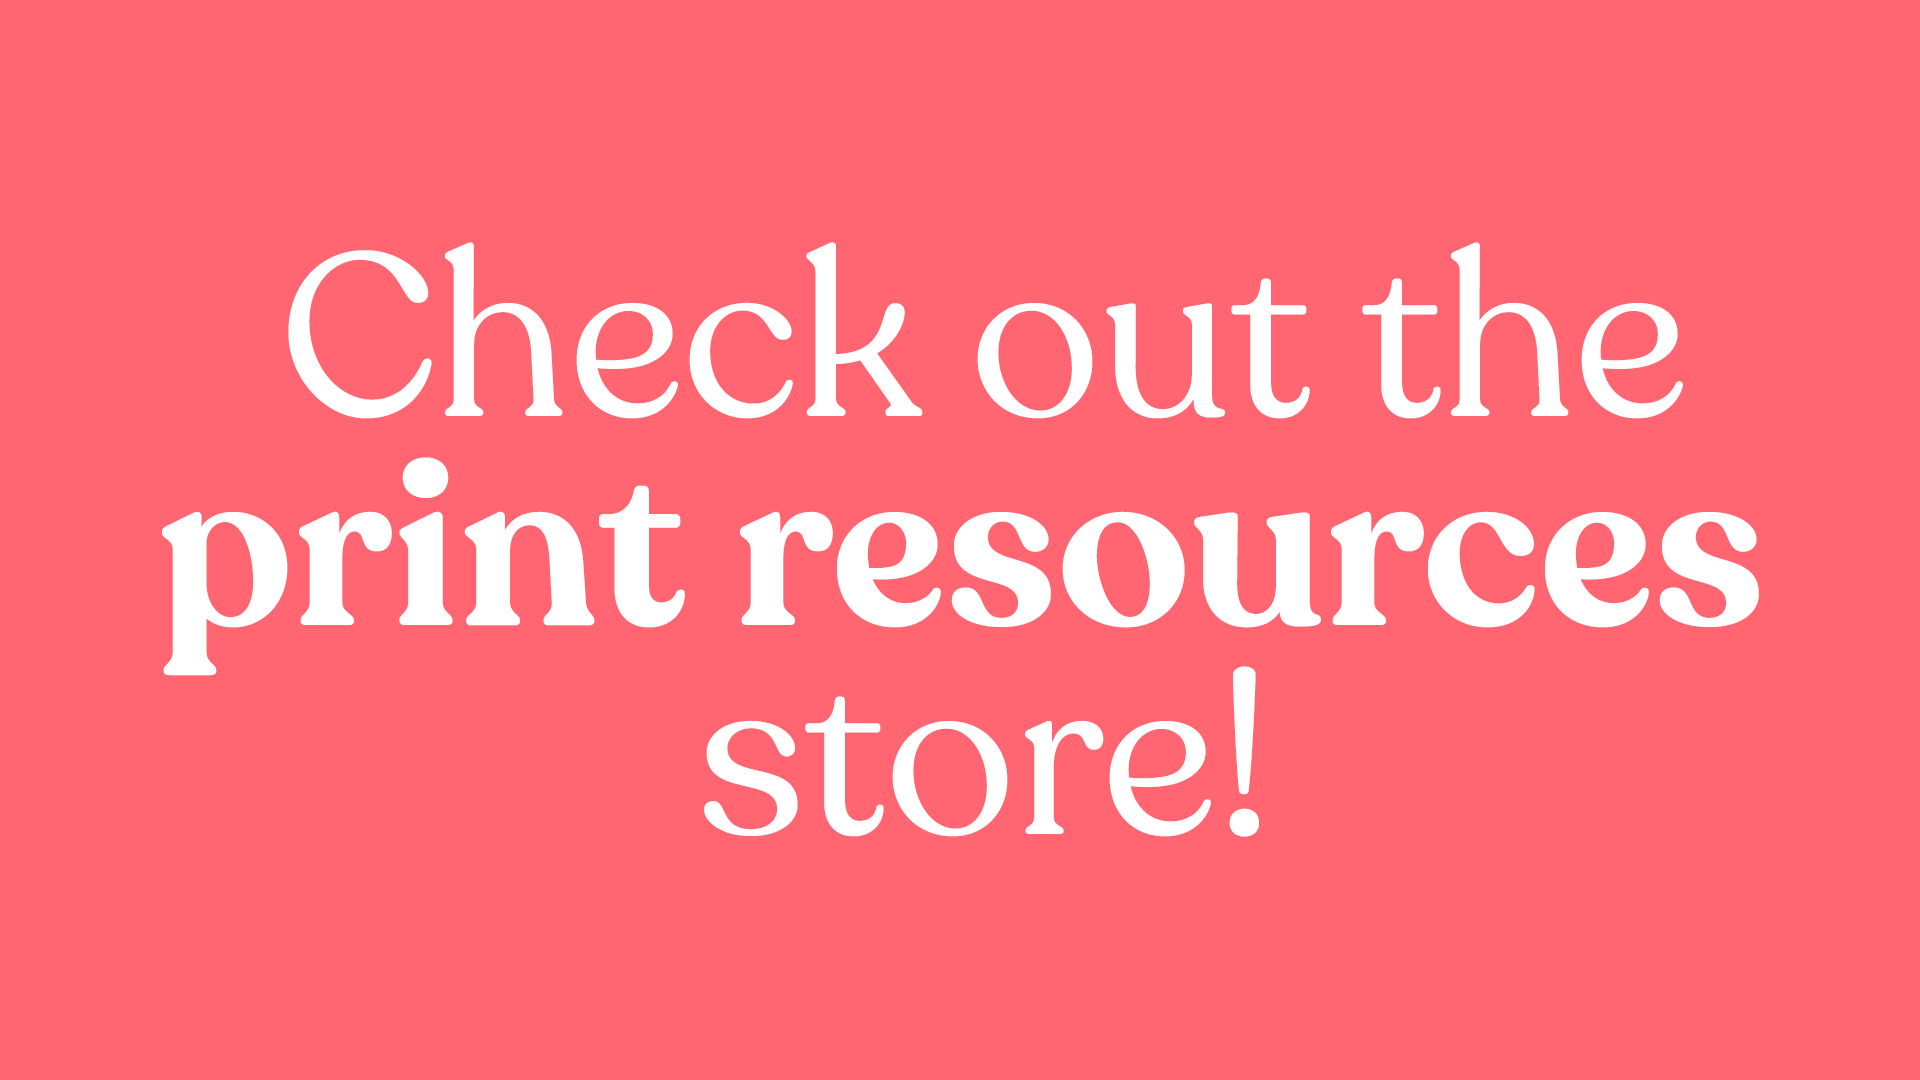 PRINT RESOURCES STORE